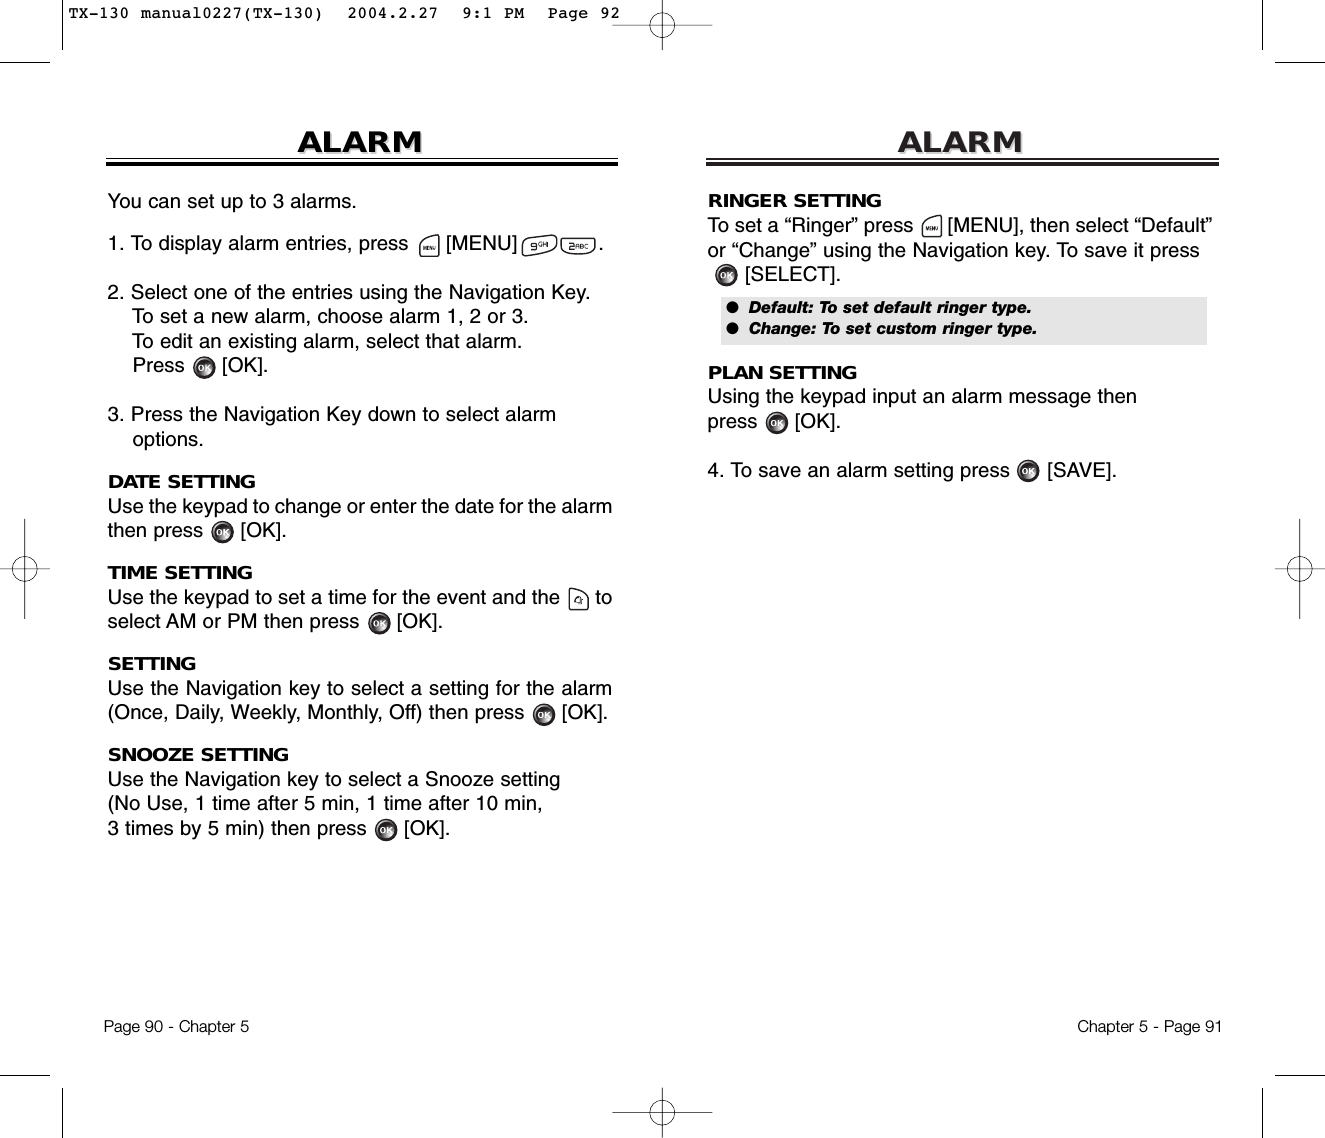 ALARMALARMChapter 5 - Page 91RINGER SETTINGTo set a “Ringer” press      [MENU], then select “Default”or “Change” using the Navigation key. To save it press[SELECT].PLAN SETTINGUsing the keypad input an alarm message then press      [OK].4. To save an alarm setting press [SAVE].ALARMALARMPage 90 - Chapter 5You can set up to 3 alarms.1. To display alarm entries, press      [MENU]             .2. Select one of the entries using the Navigation Key.To set a new alarm, choose alarm 1, 2 or 3.To edit an existing alarm, select that alarm.Press [OK].3. Press the Navigation Key down to select alarm options.DATE SETTINGUse the keypad to change or enter the date for the alarmthen press      [OK].TIME SETTINGUse the keypad to set a time for the event and the      toselect AM or PM then press      [OK].SETTINGUse the Navigation key to select a setting for the alarm(Once, Daily, Weekly, Monthly, Off) then press      [OK].SNOOZE SETTINGUse the Navigation key to select a Snooze setting (No Use, 1 time after 5 min, 1 time after 10 min, 3 times by 5 min) then press      [OK].●  Default: To set default ringer type.●  Change: To set custom ringer type.TX-130 manual0227(TX-130)  2004.2.27  9:1 PM  Page 92